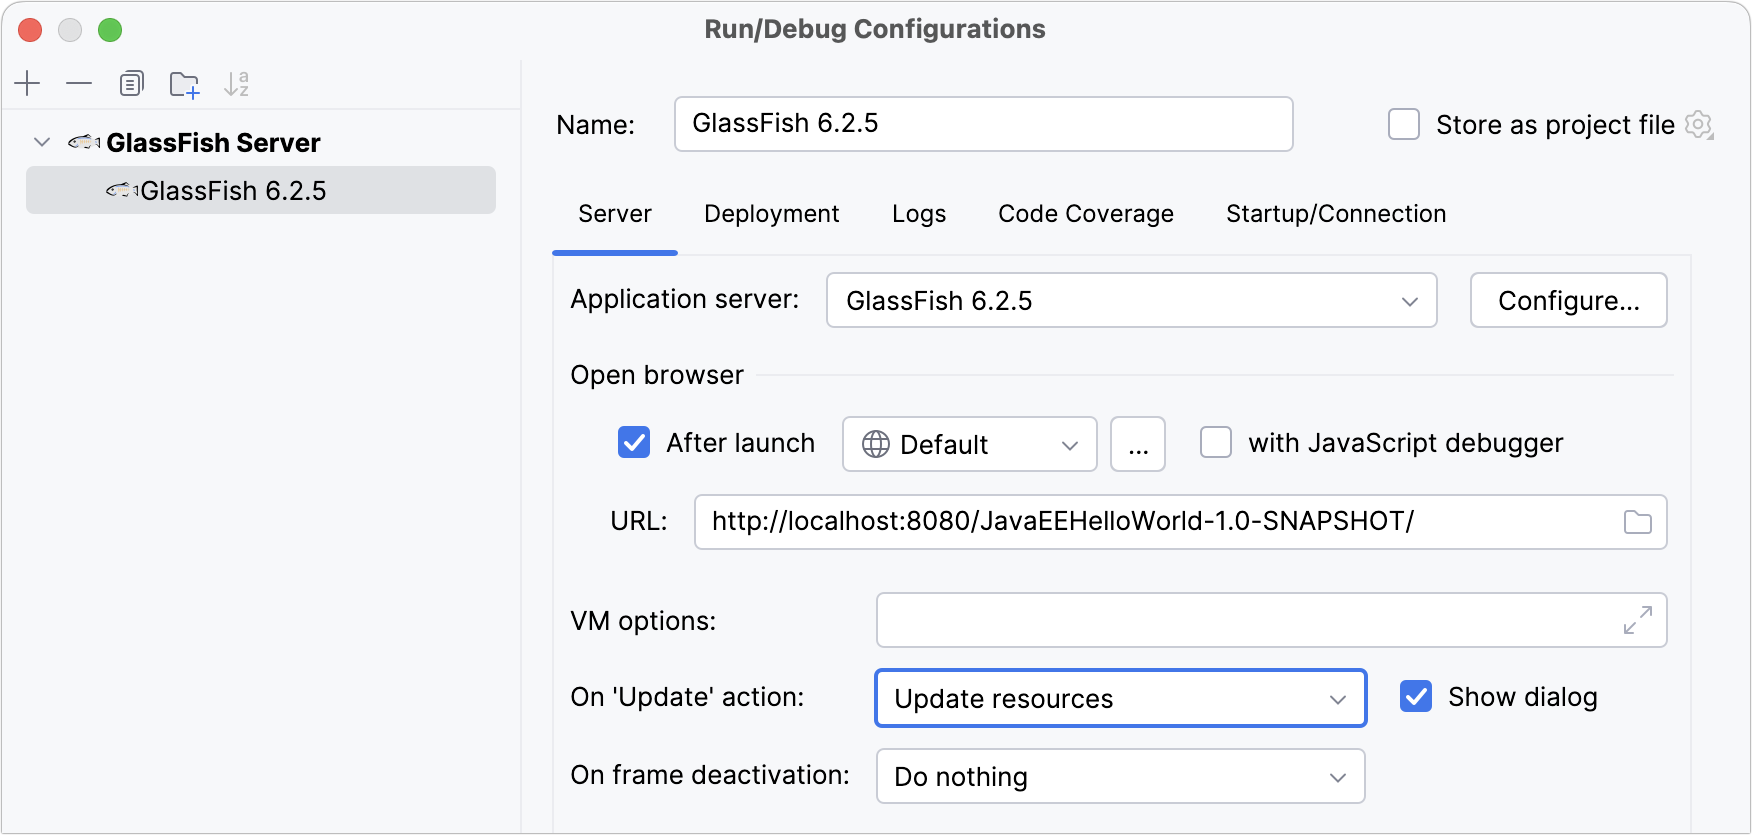 Configure application update actions in the GlassFish run configuration